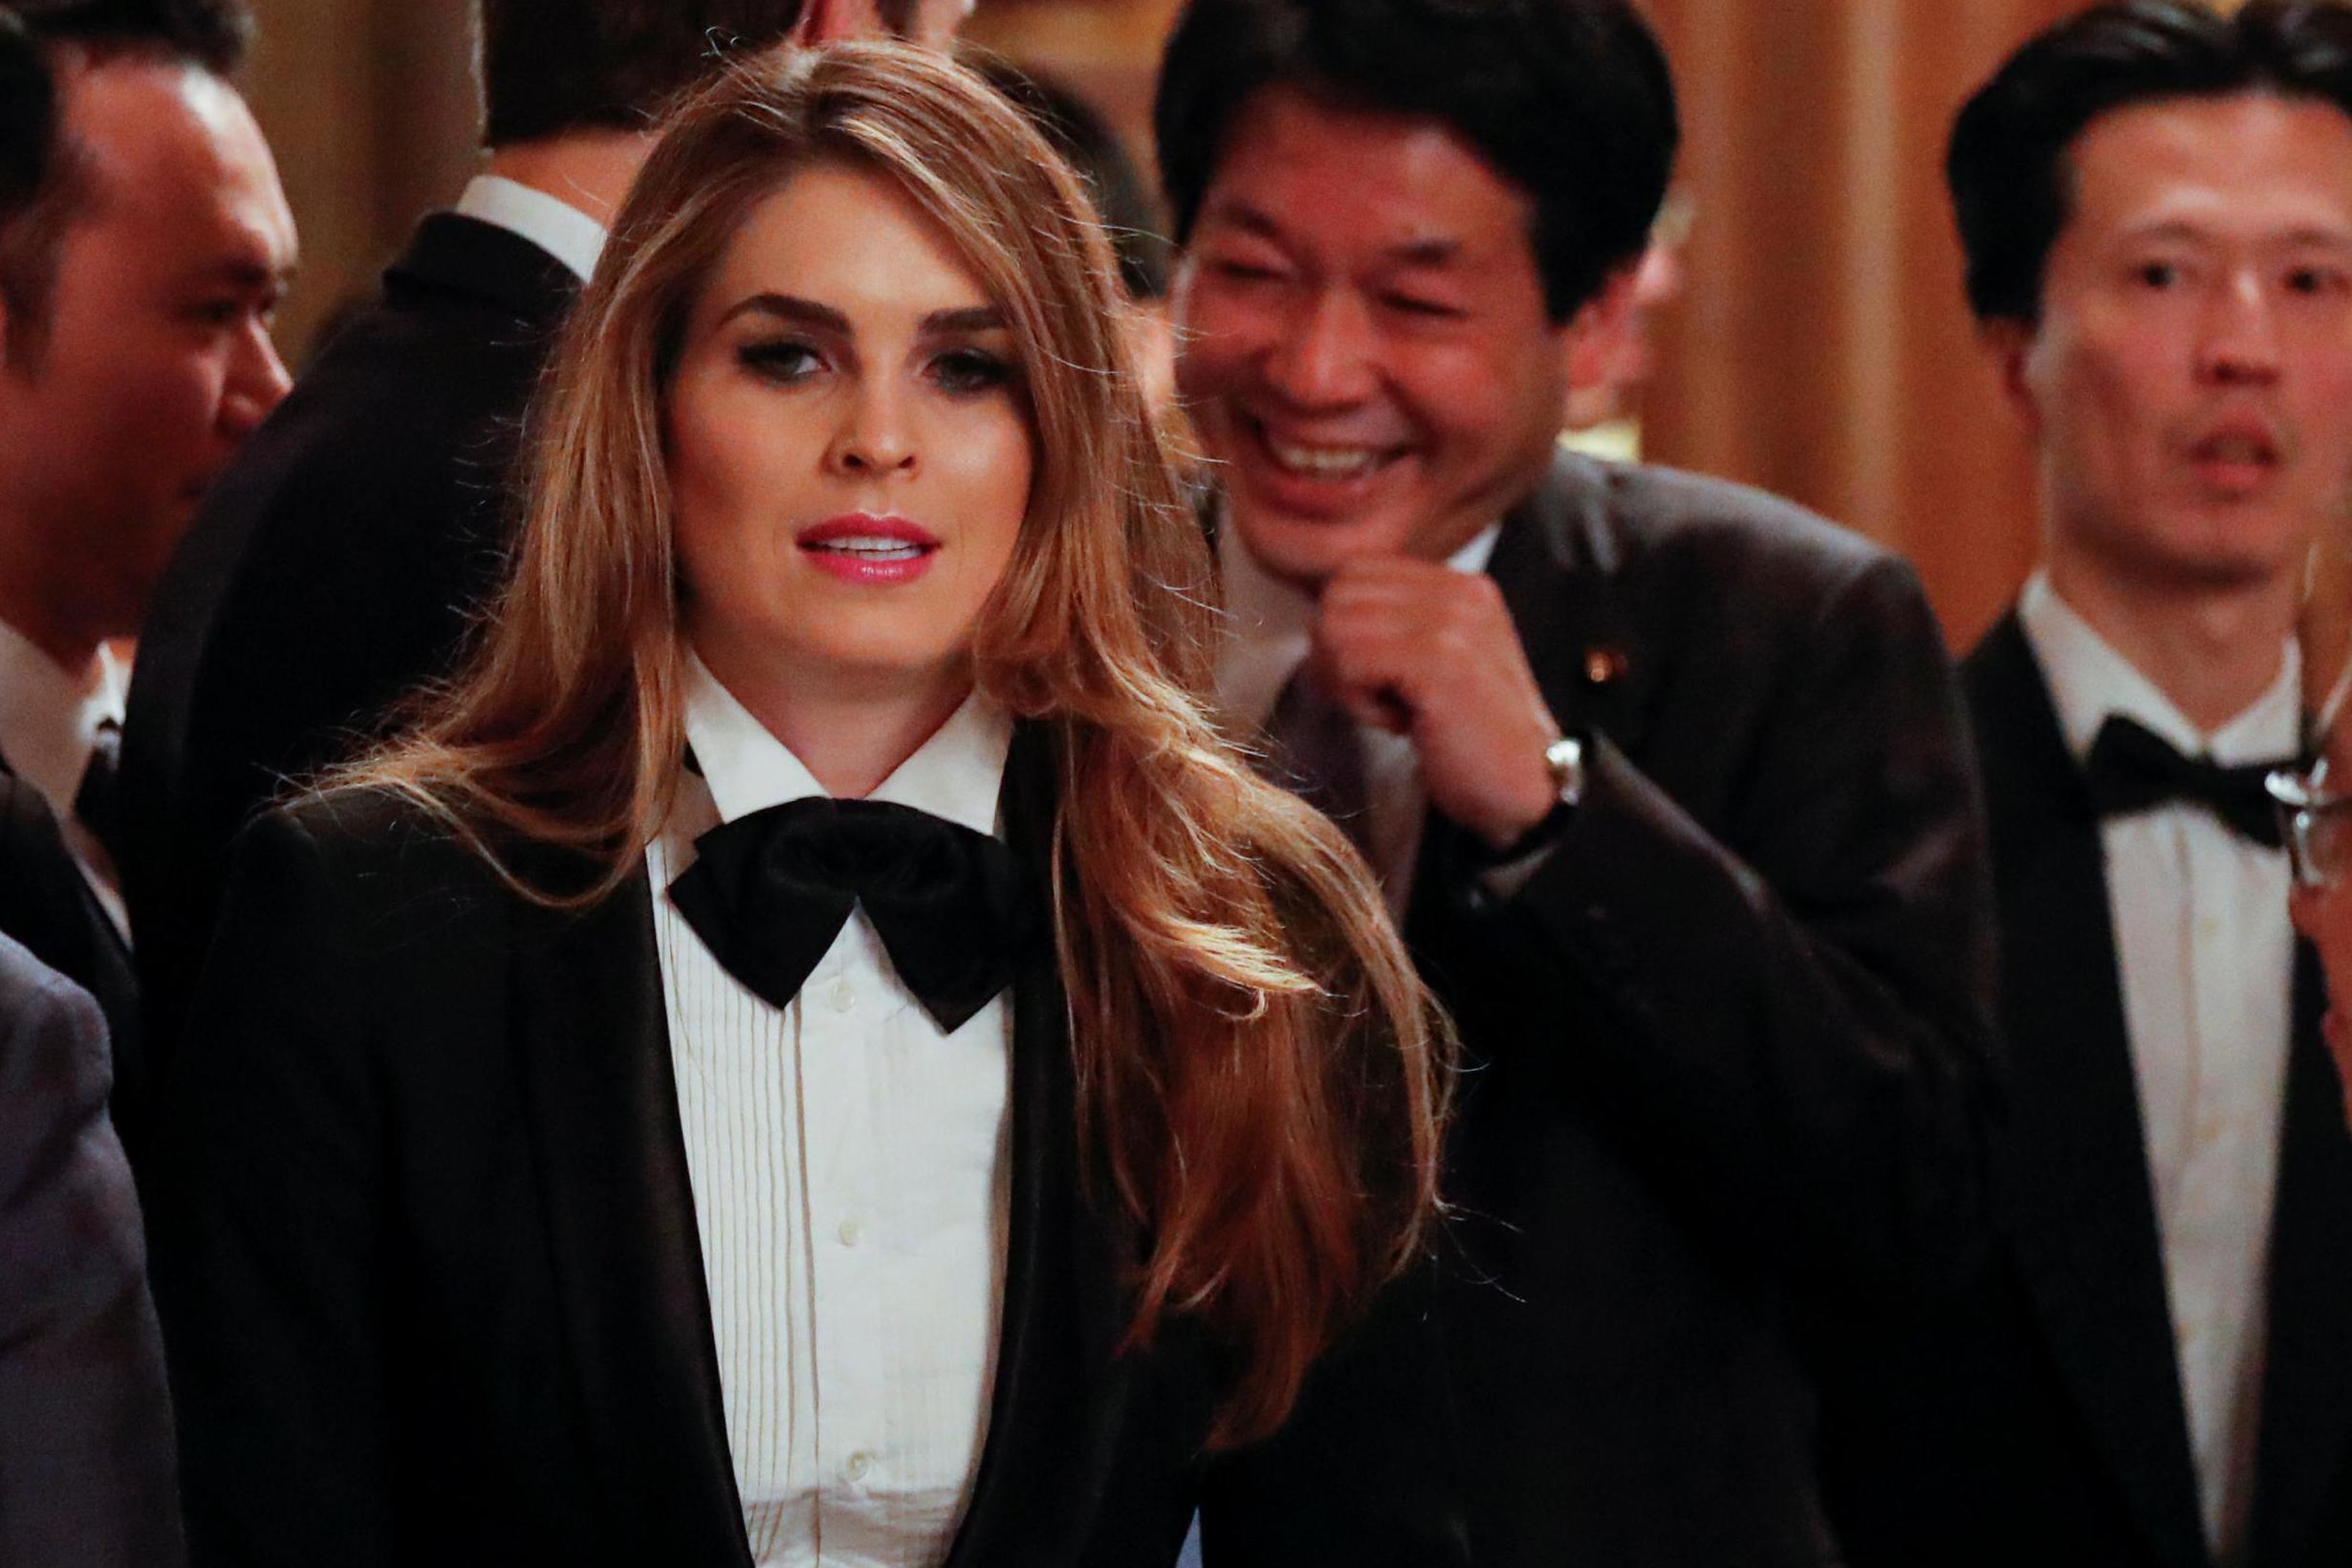 Hope Hicks dons a tuxedo at Japan state dinner | The Independent2460 x 1640